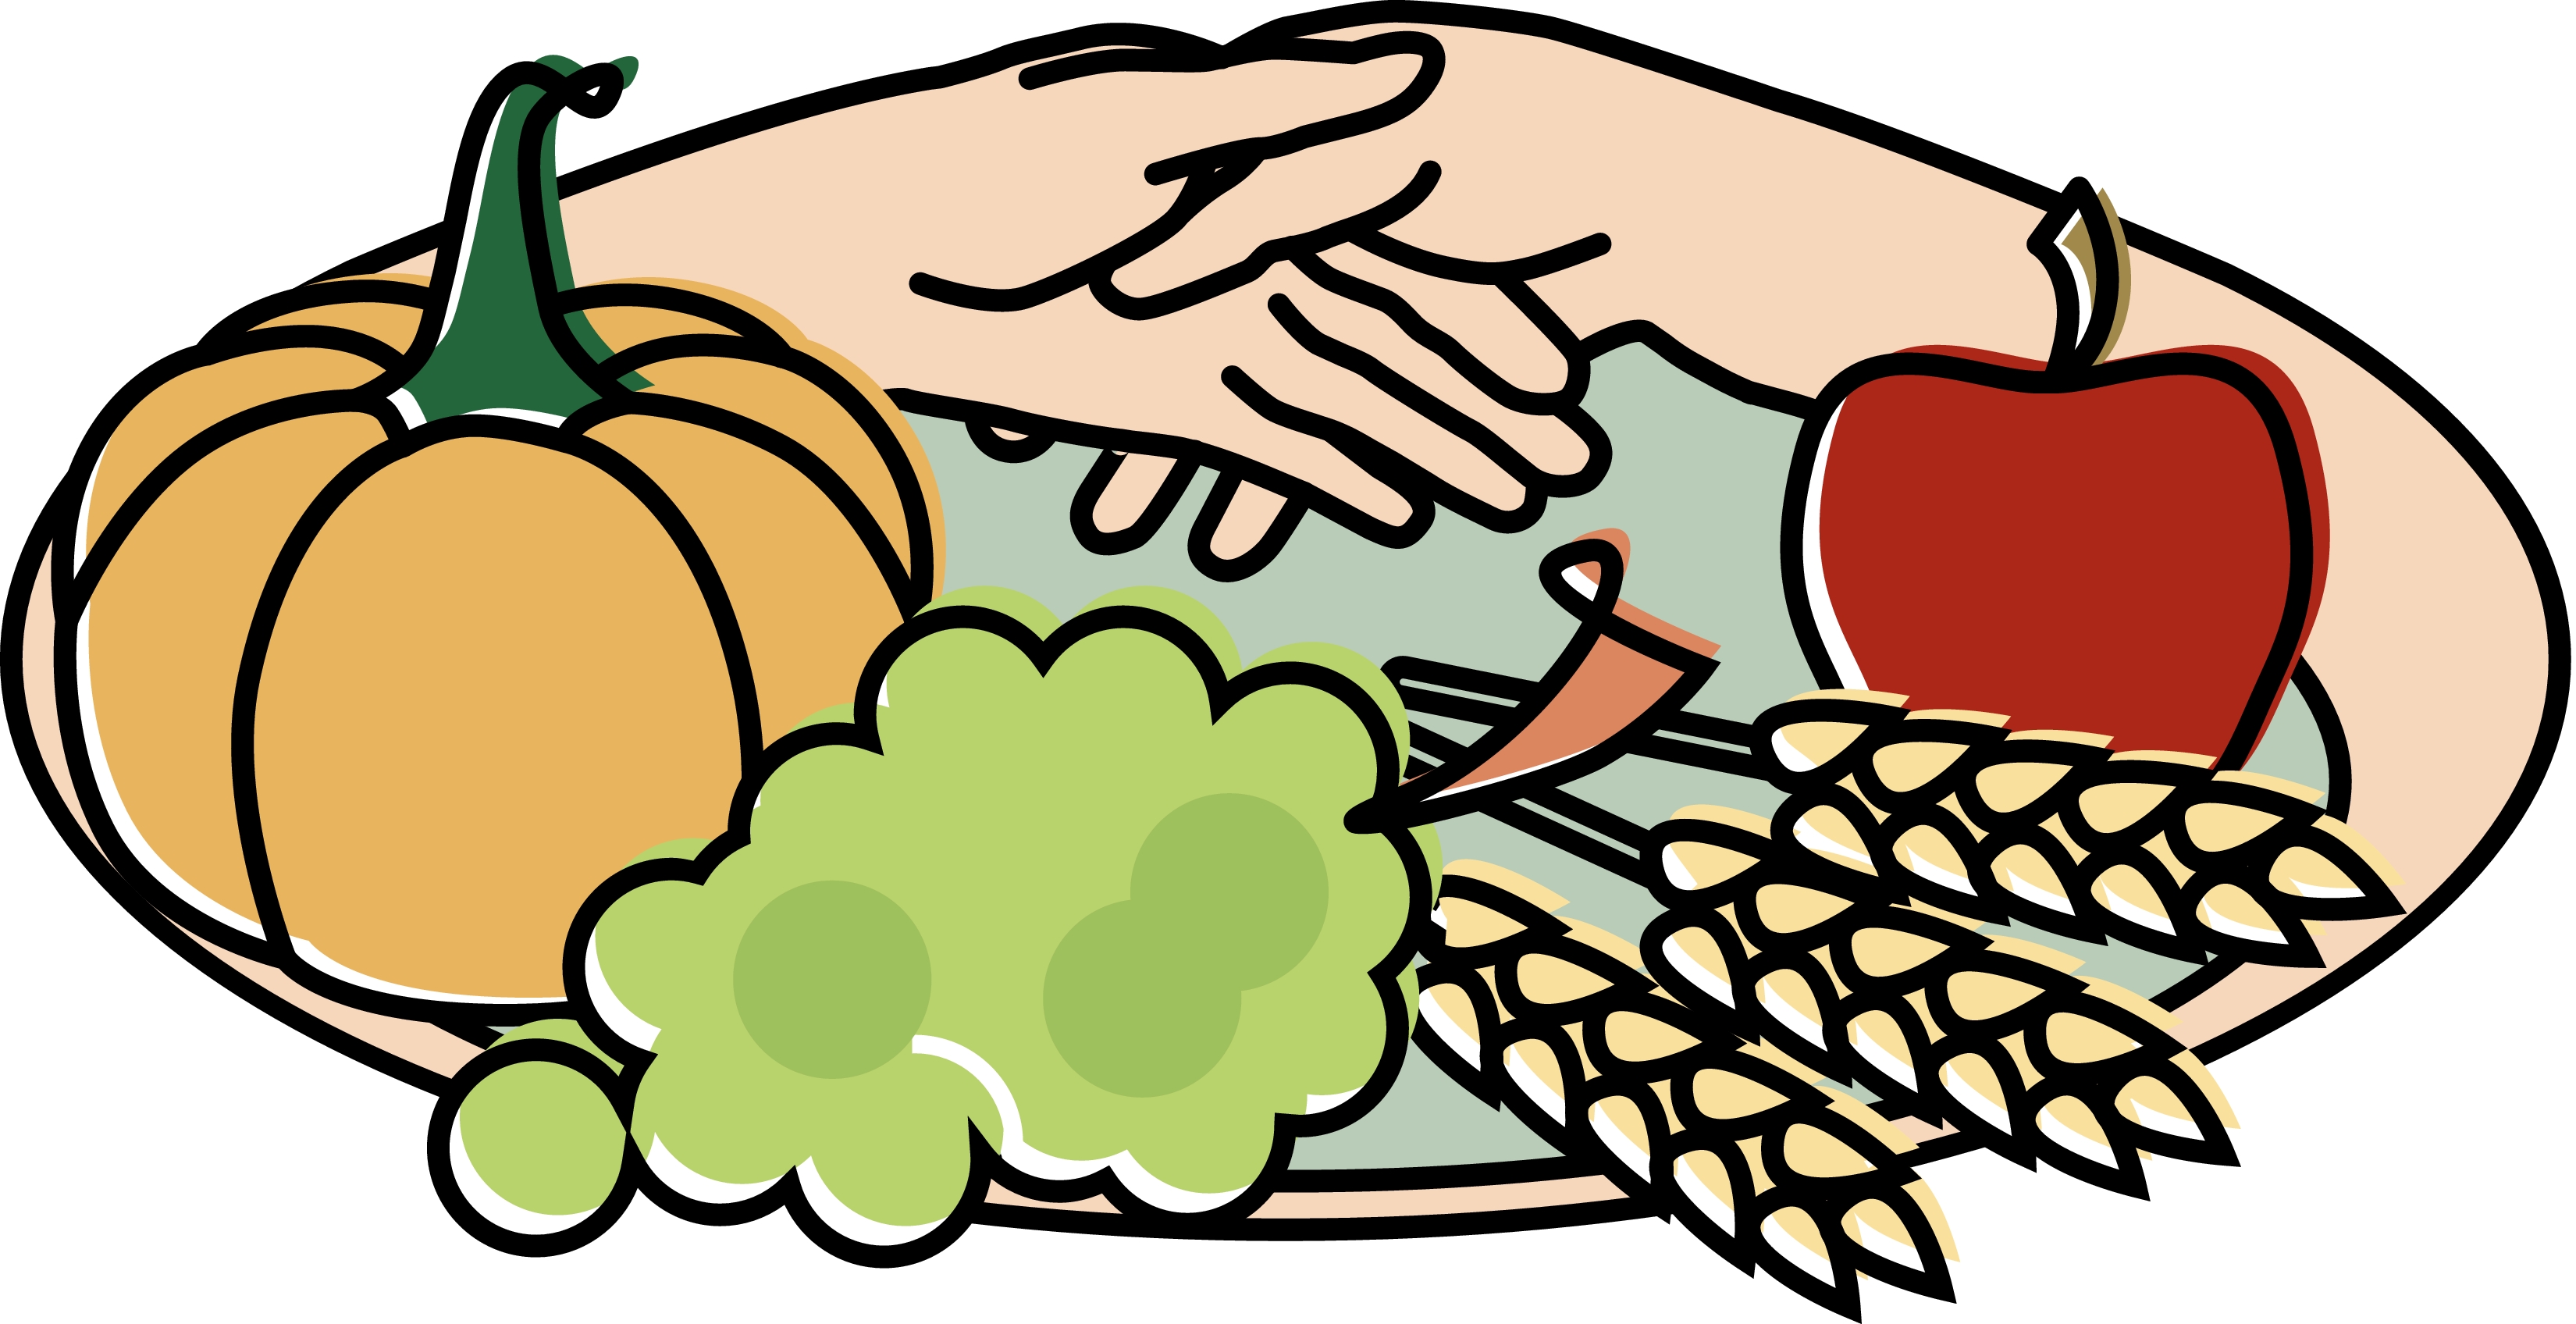 Food bank clipart free